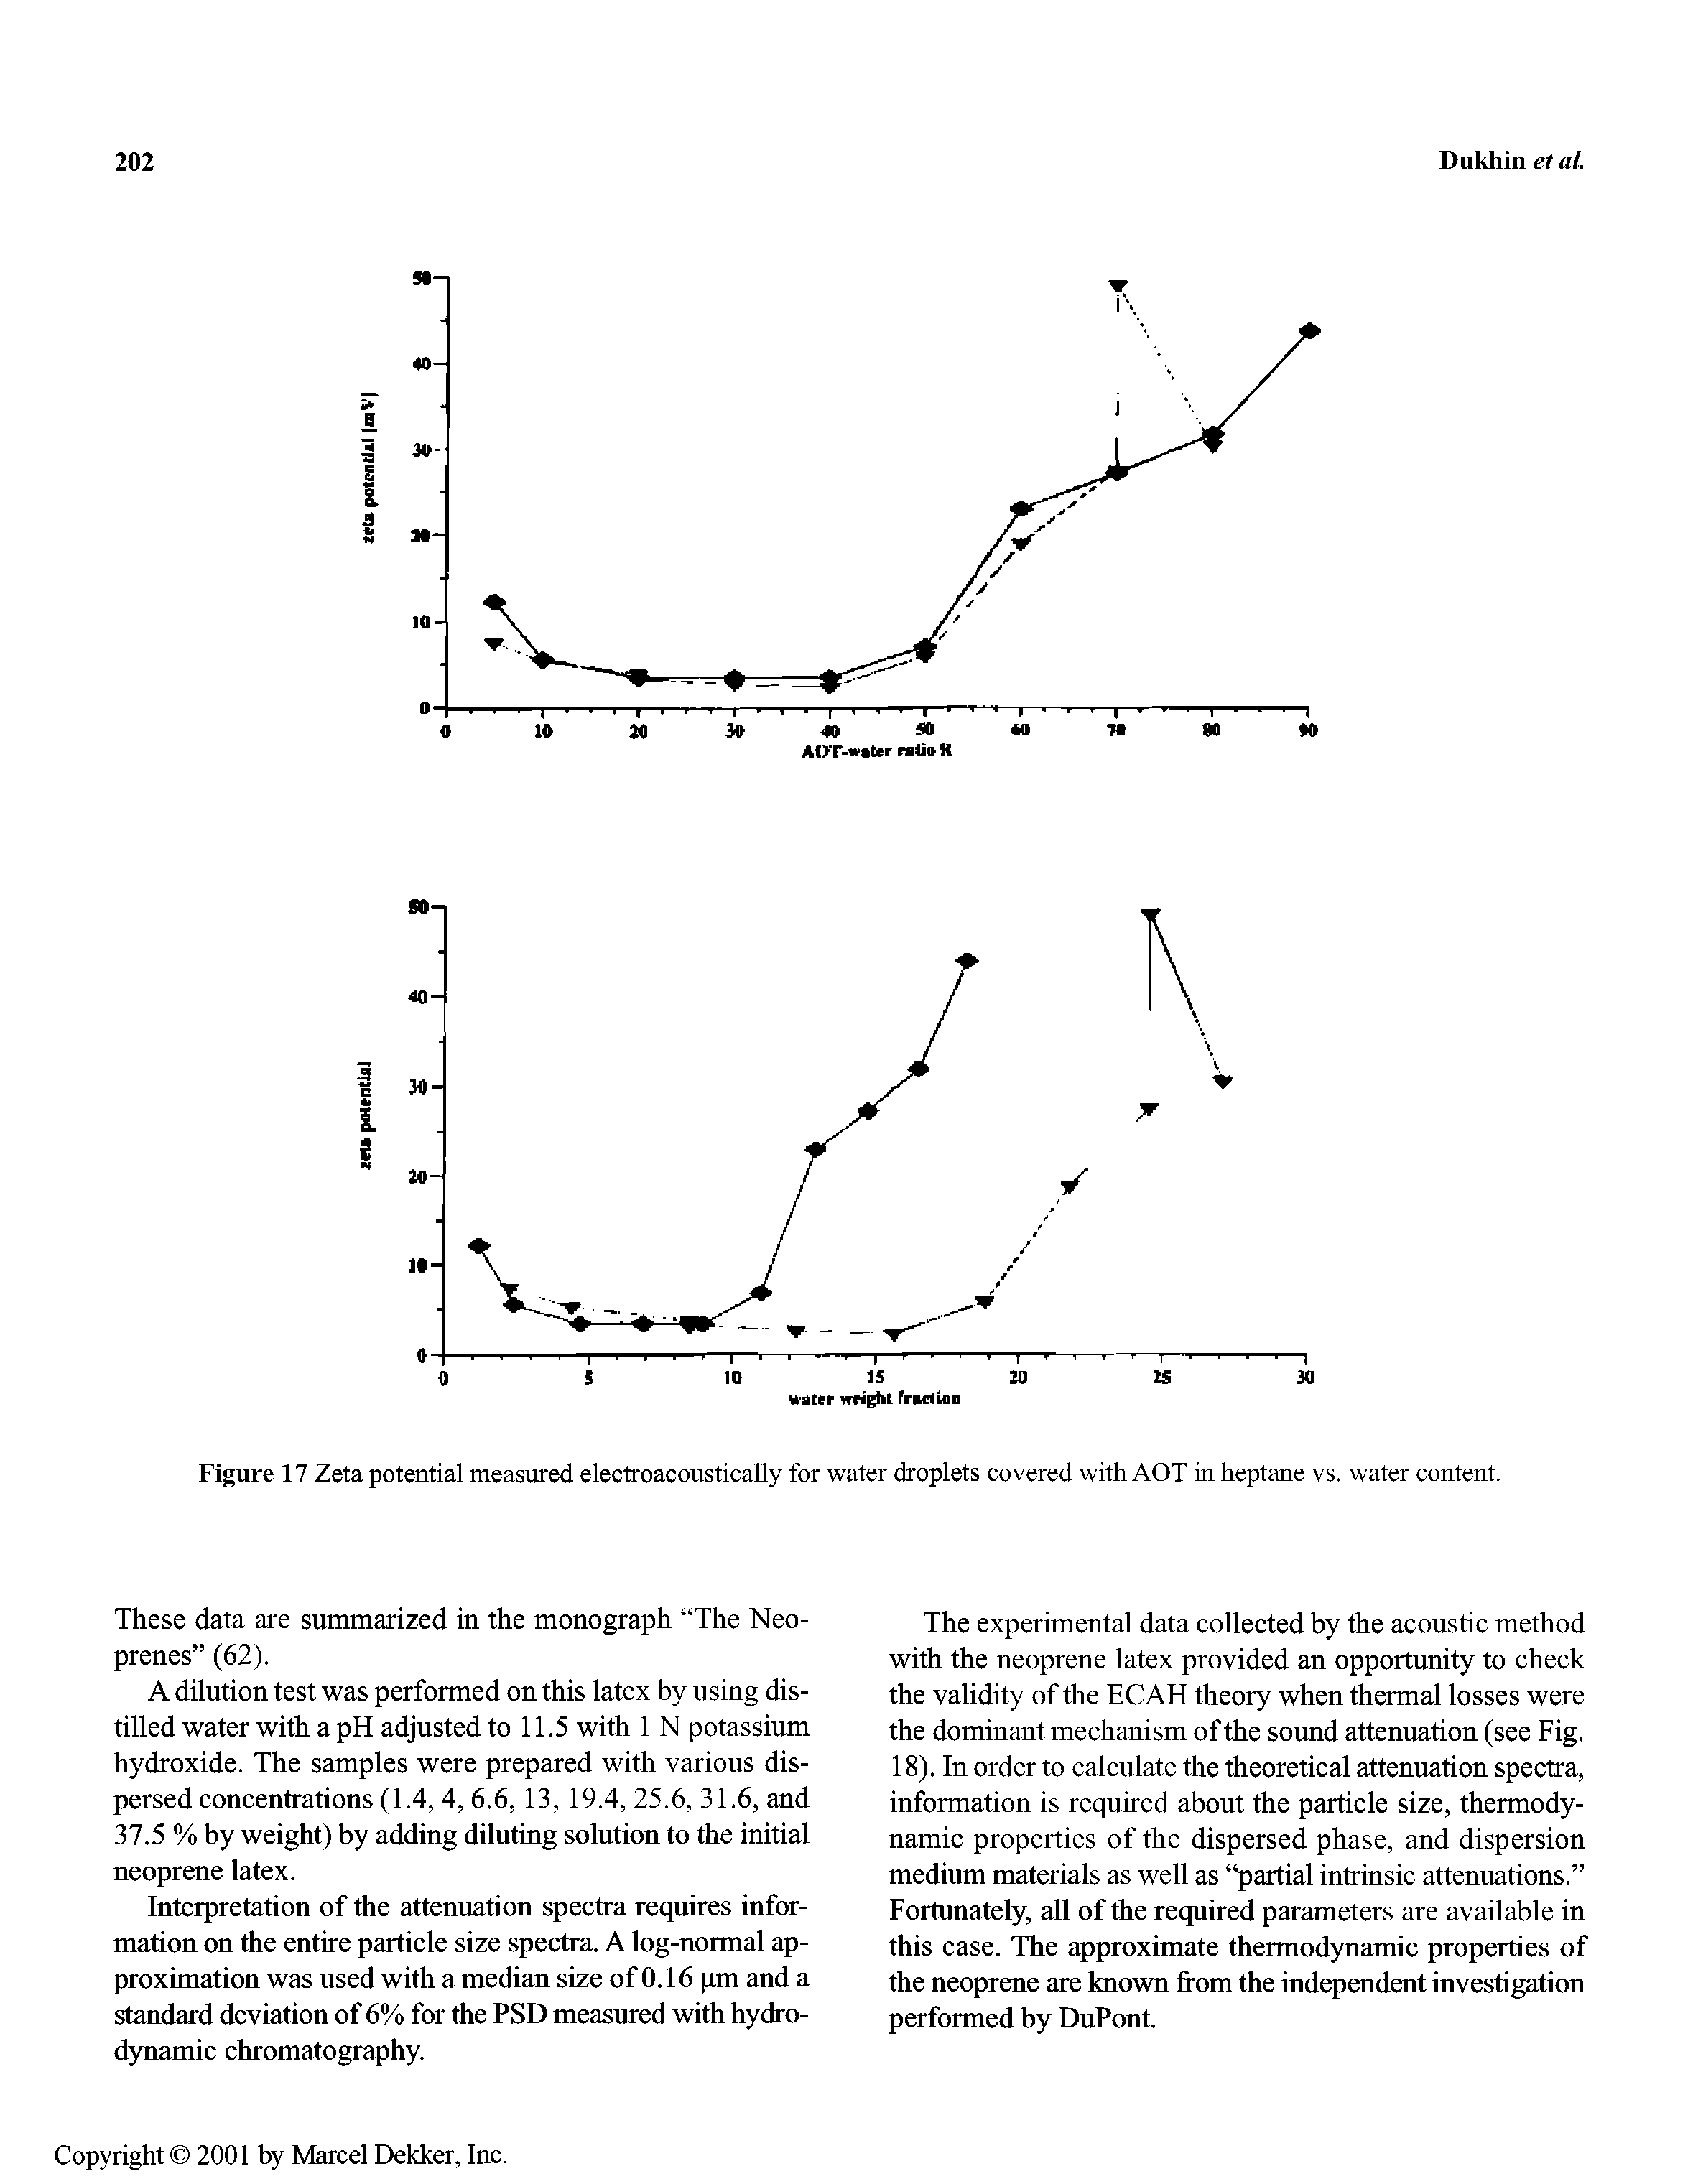 Figure 17 Zeta potential measured electroacoustically for water droplets covered with AOT in heptane vs. water content.